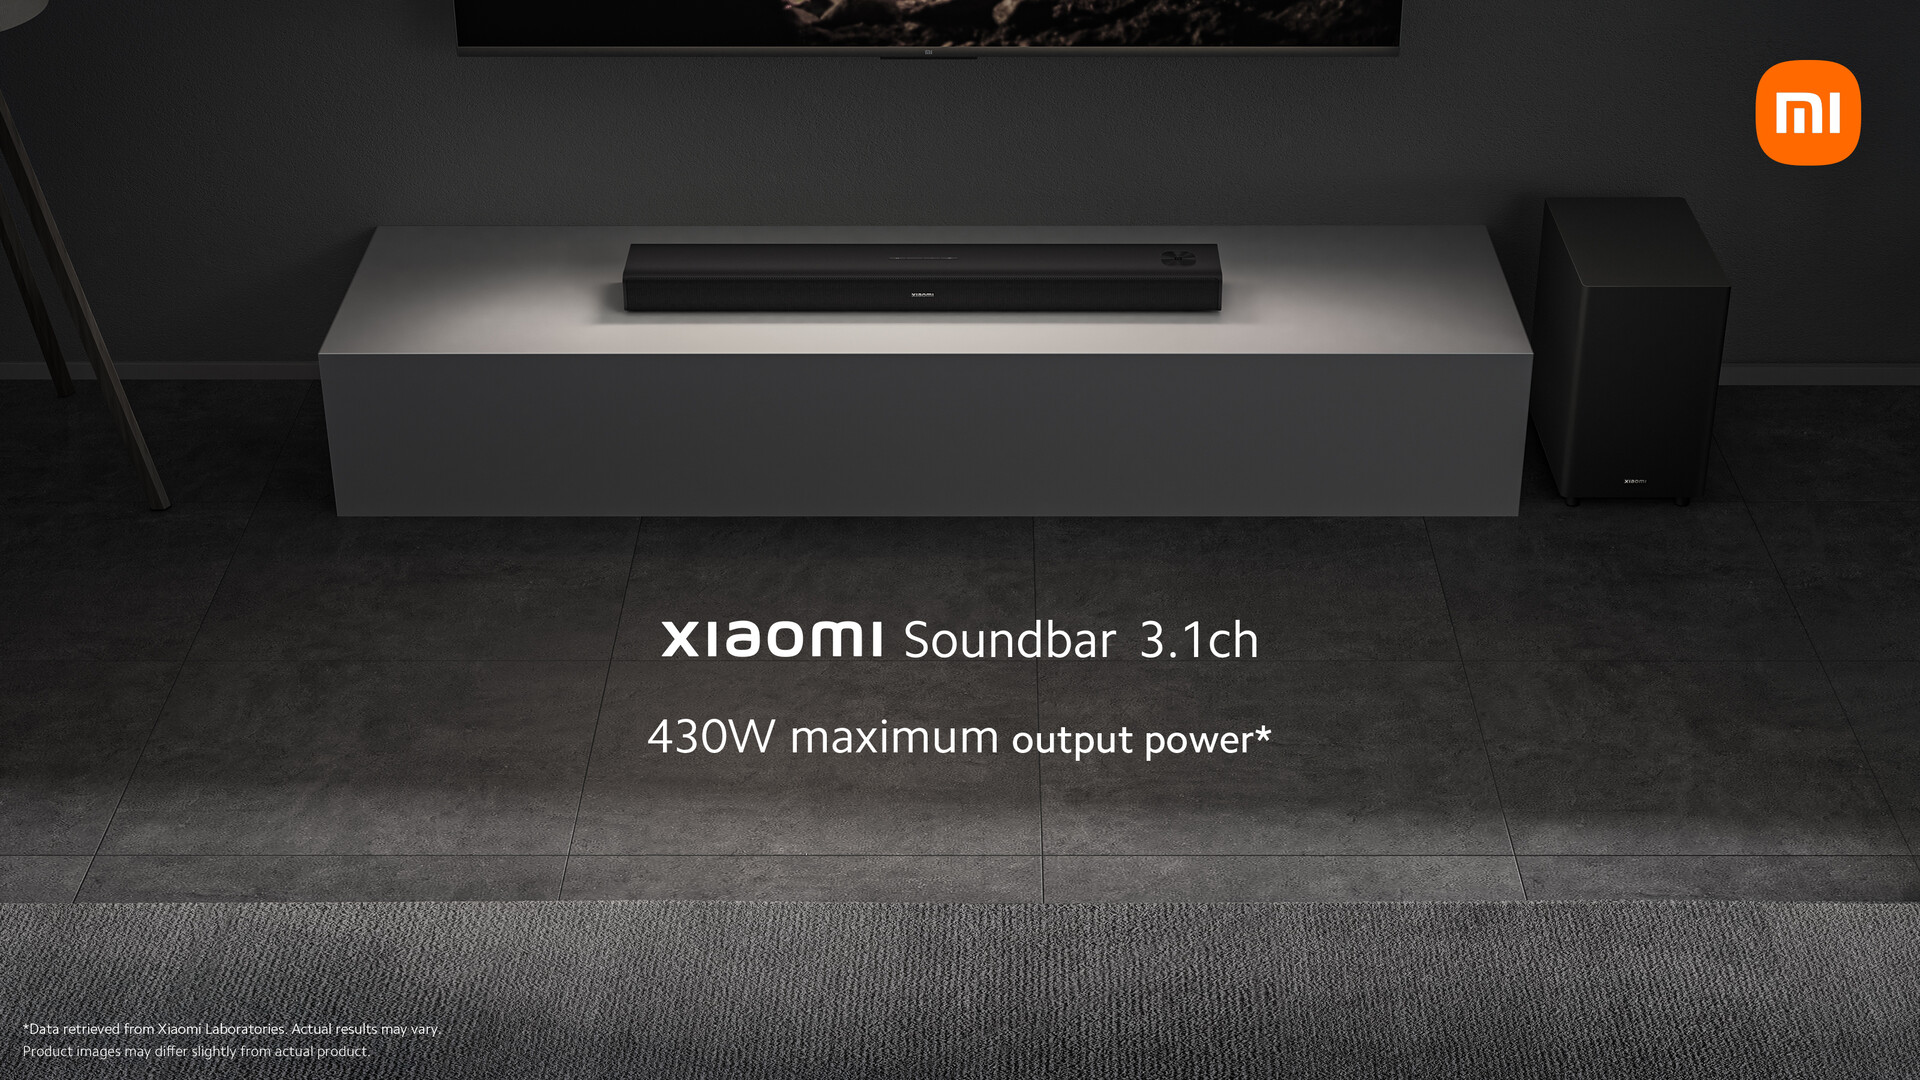 Xiaomi Soundbar 3.1ch: 430 W soundbar announced with a wireless subwoofer, NFC, Dolby Audio and DTS Virtual:X support - NotebookCheck.net News